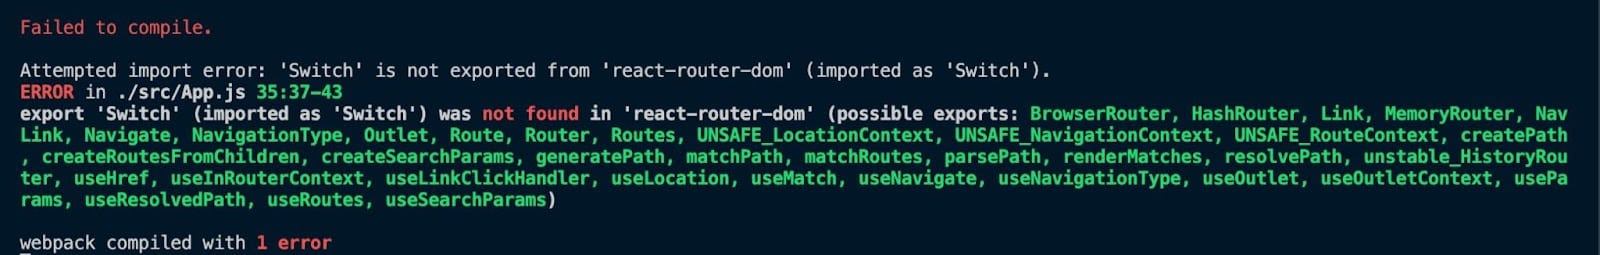 Switch' is not exported from 'react-router-dom error message